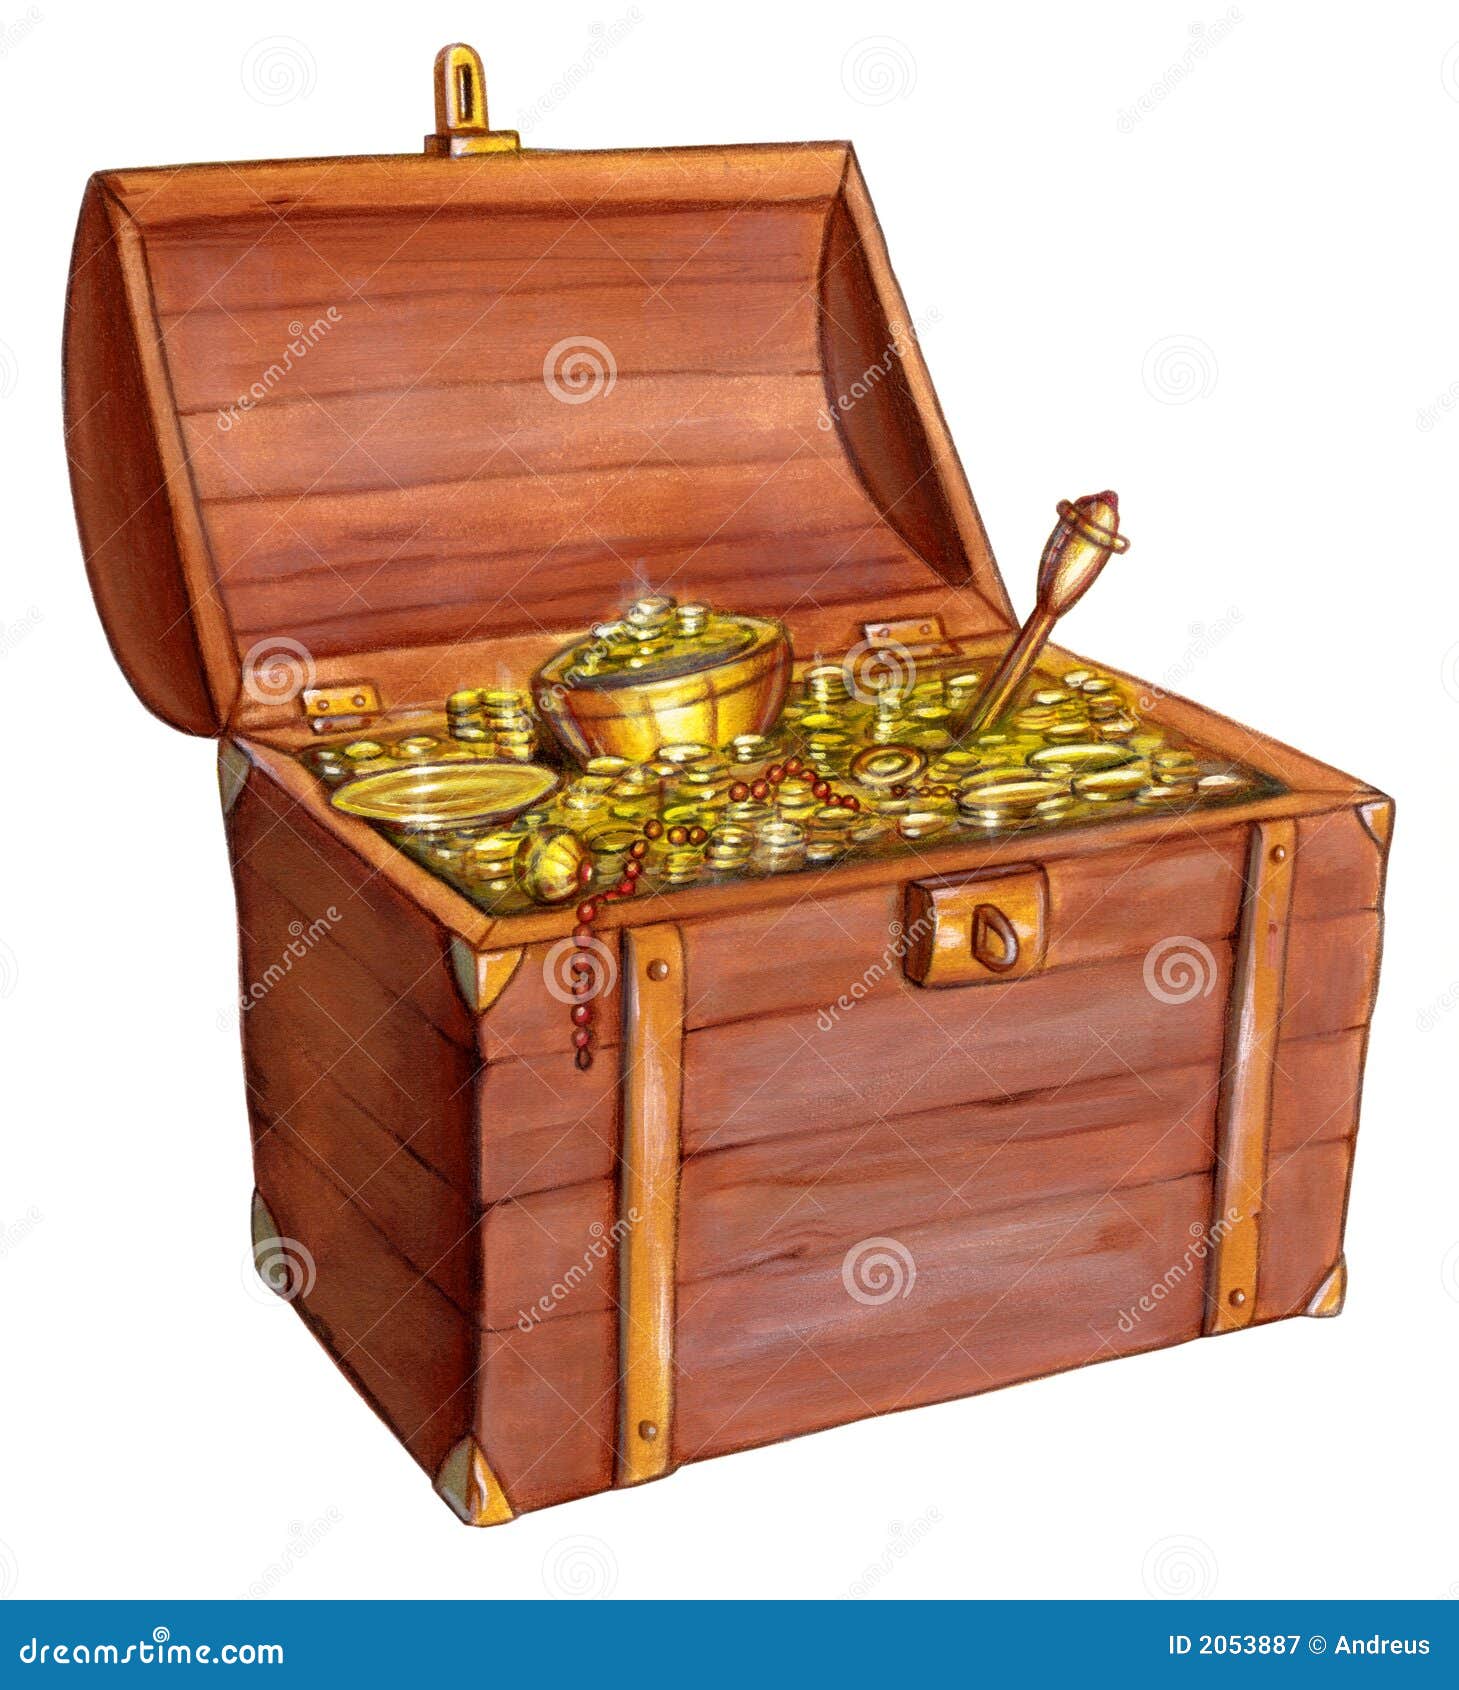 Treasure Chest Royalty Free Stock Photography - Image: 2053887